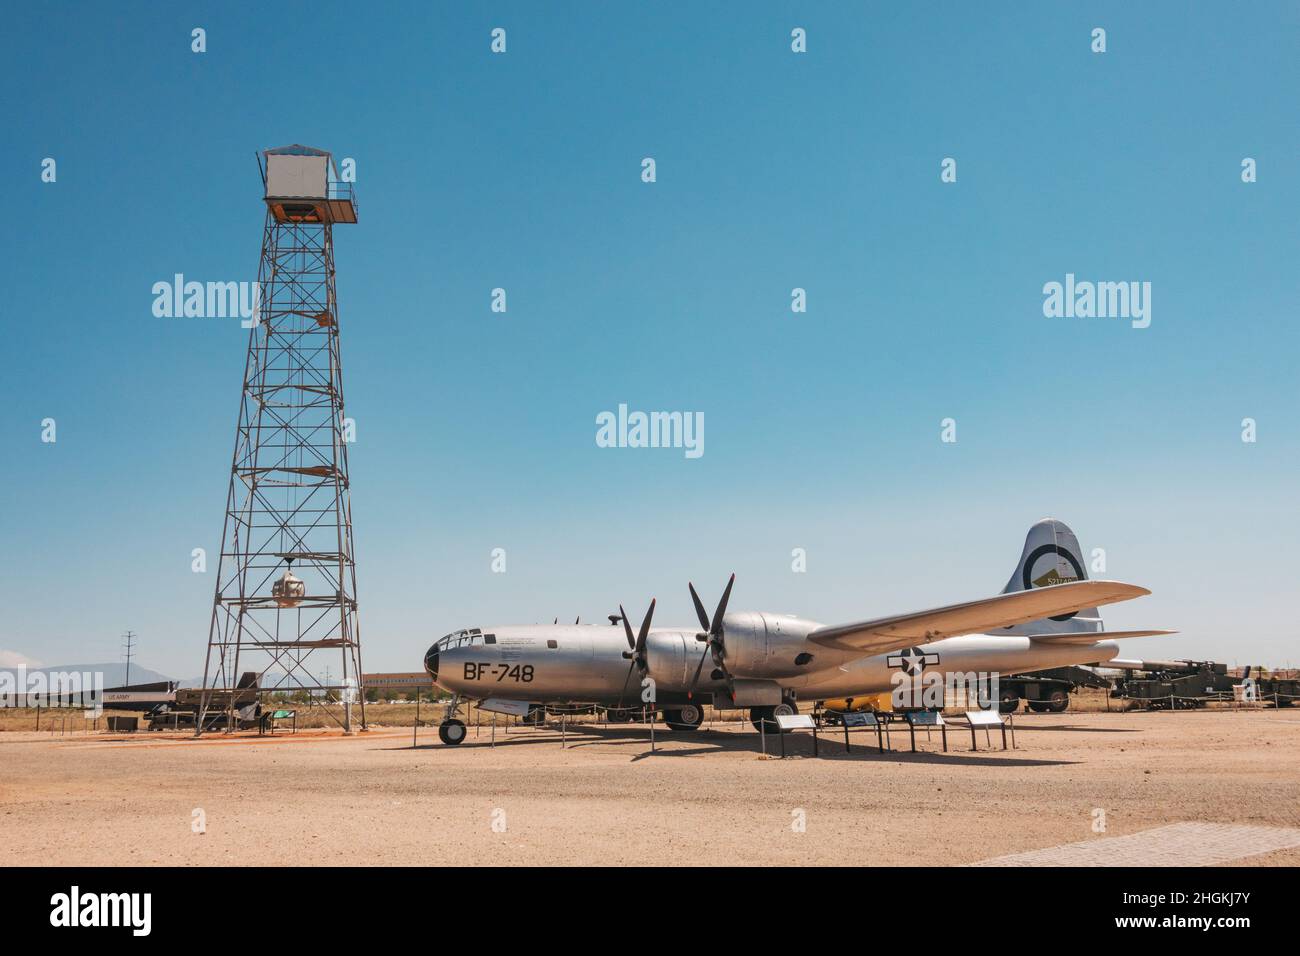 The 'Duke of Albuquerque' Boeing B-29 Superfortress airplane on display at Museum of Nuclear Science & History, New Mexico Stock Photo